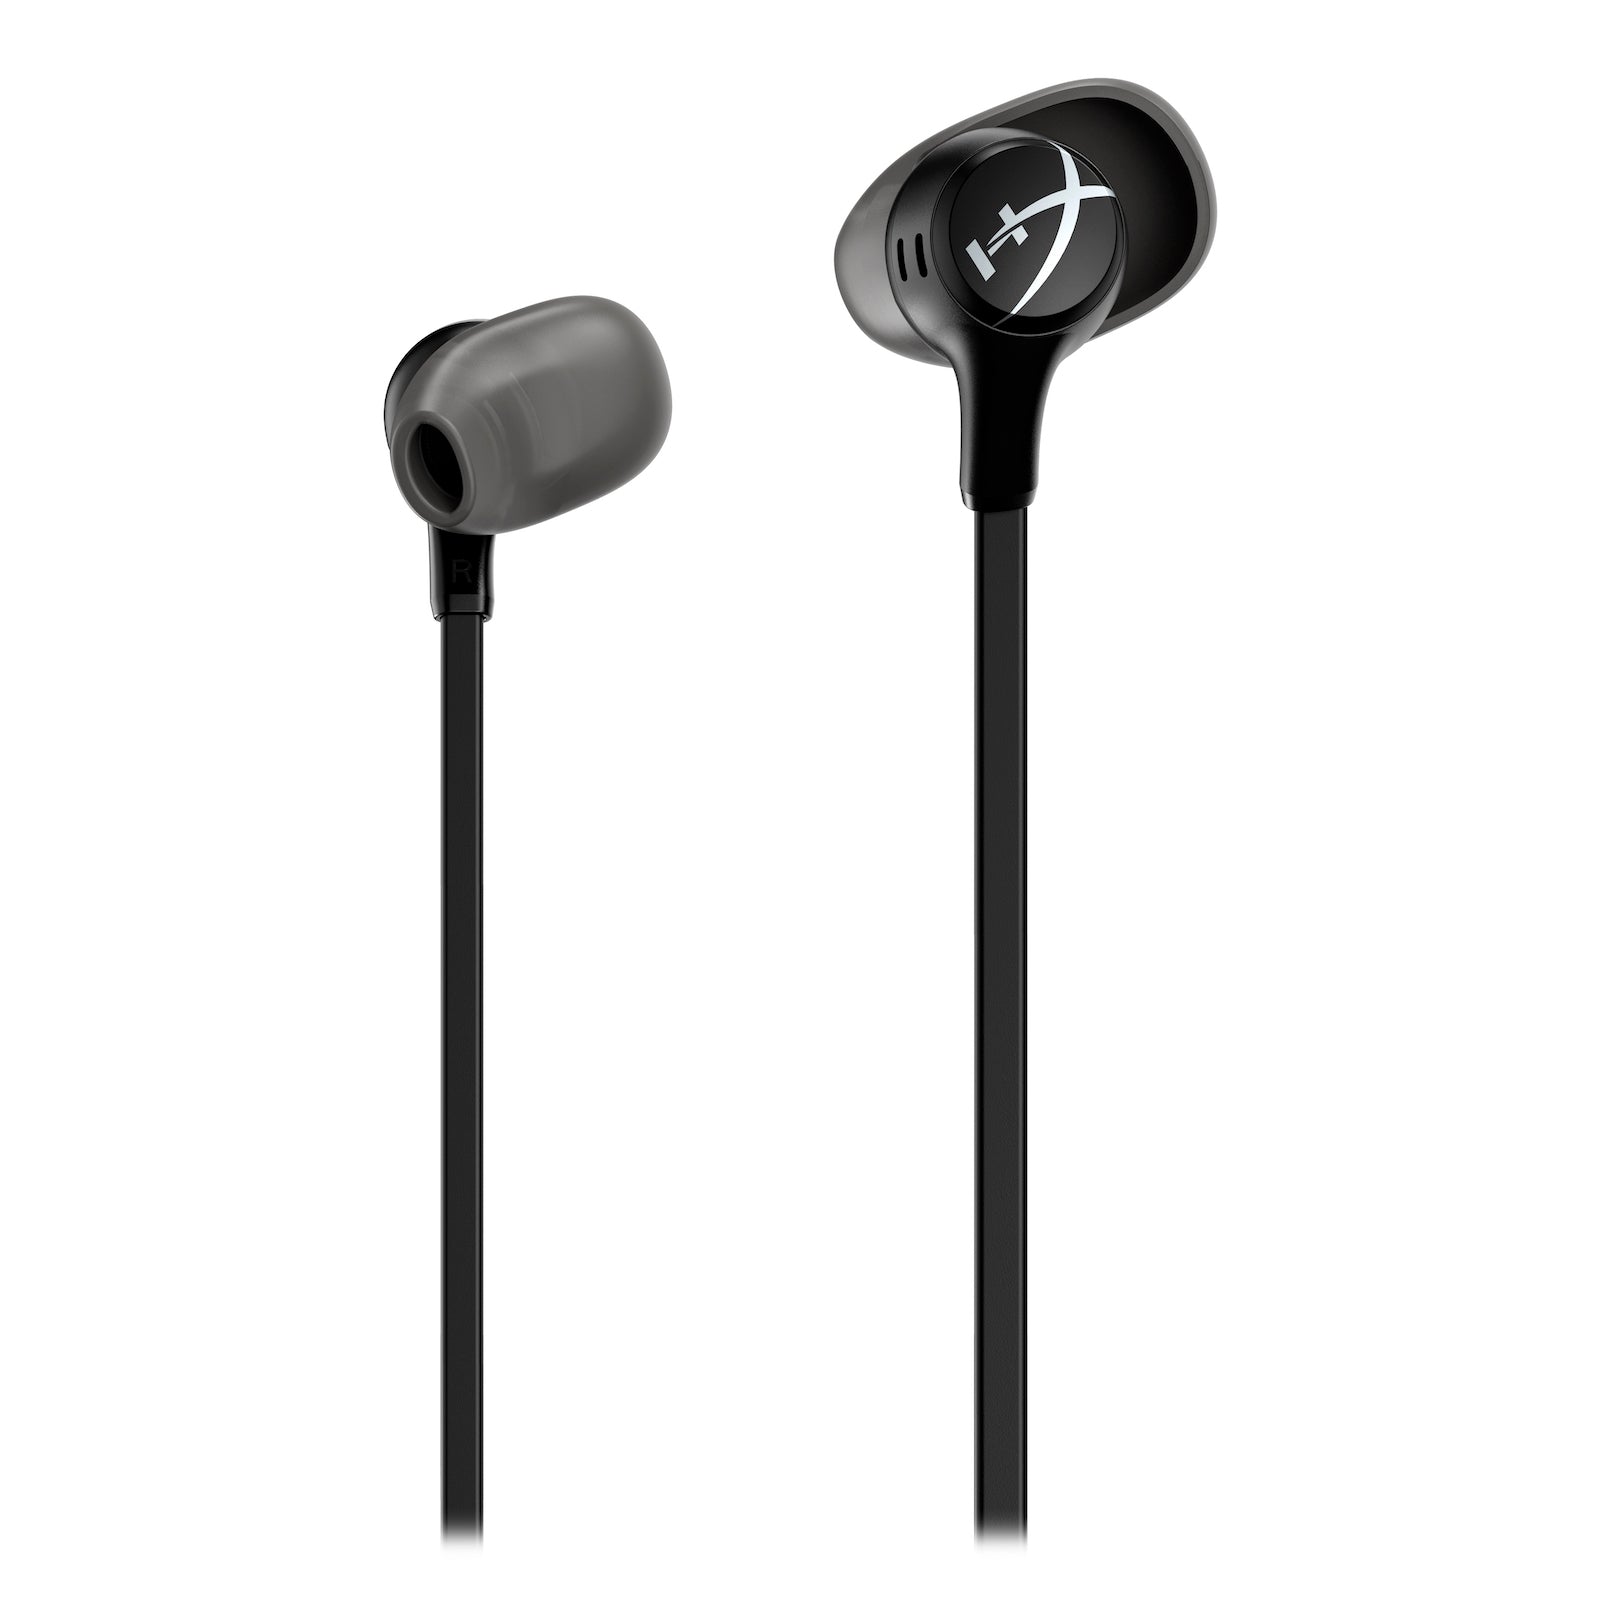 Close front view of the HyperX Earbuds II Black